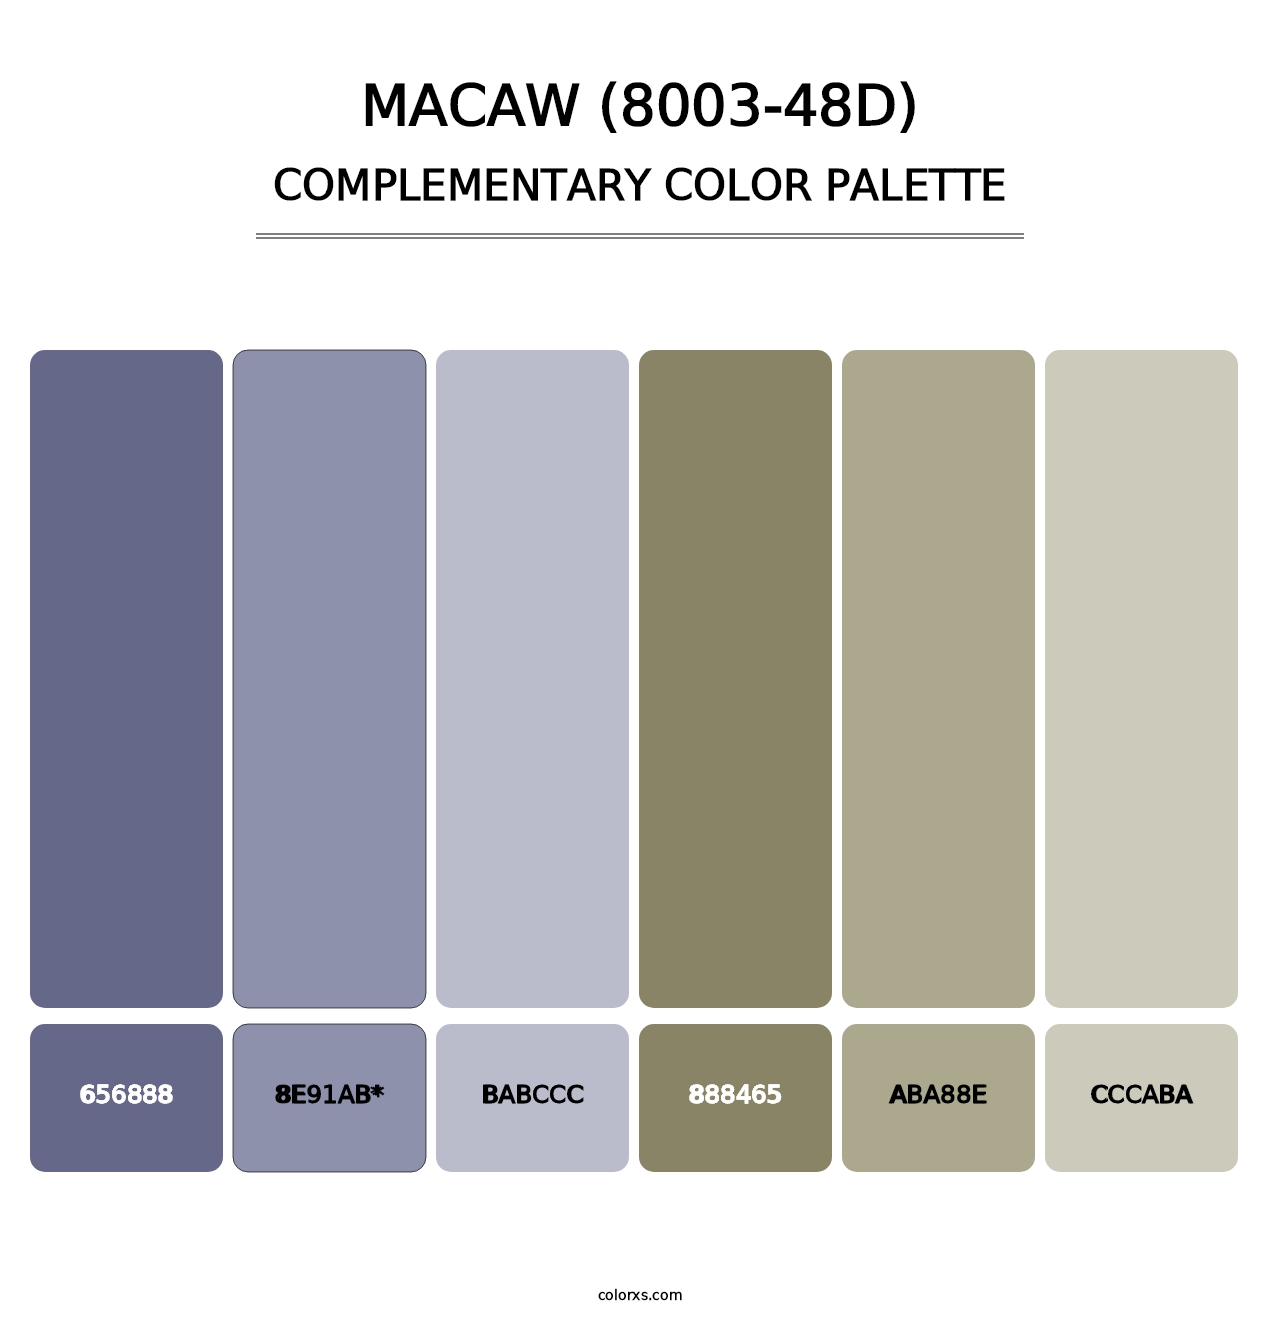 Macaw (8003-48D) - Complementary Color Palette